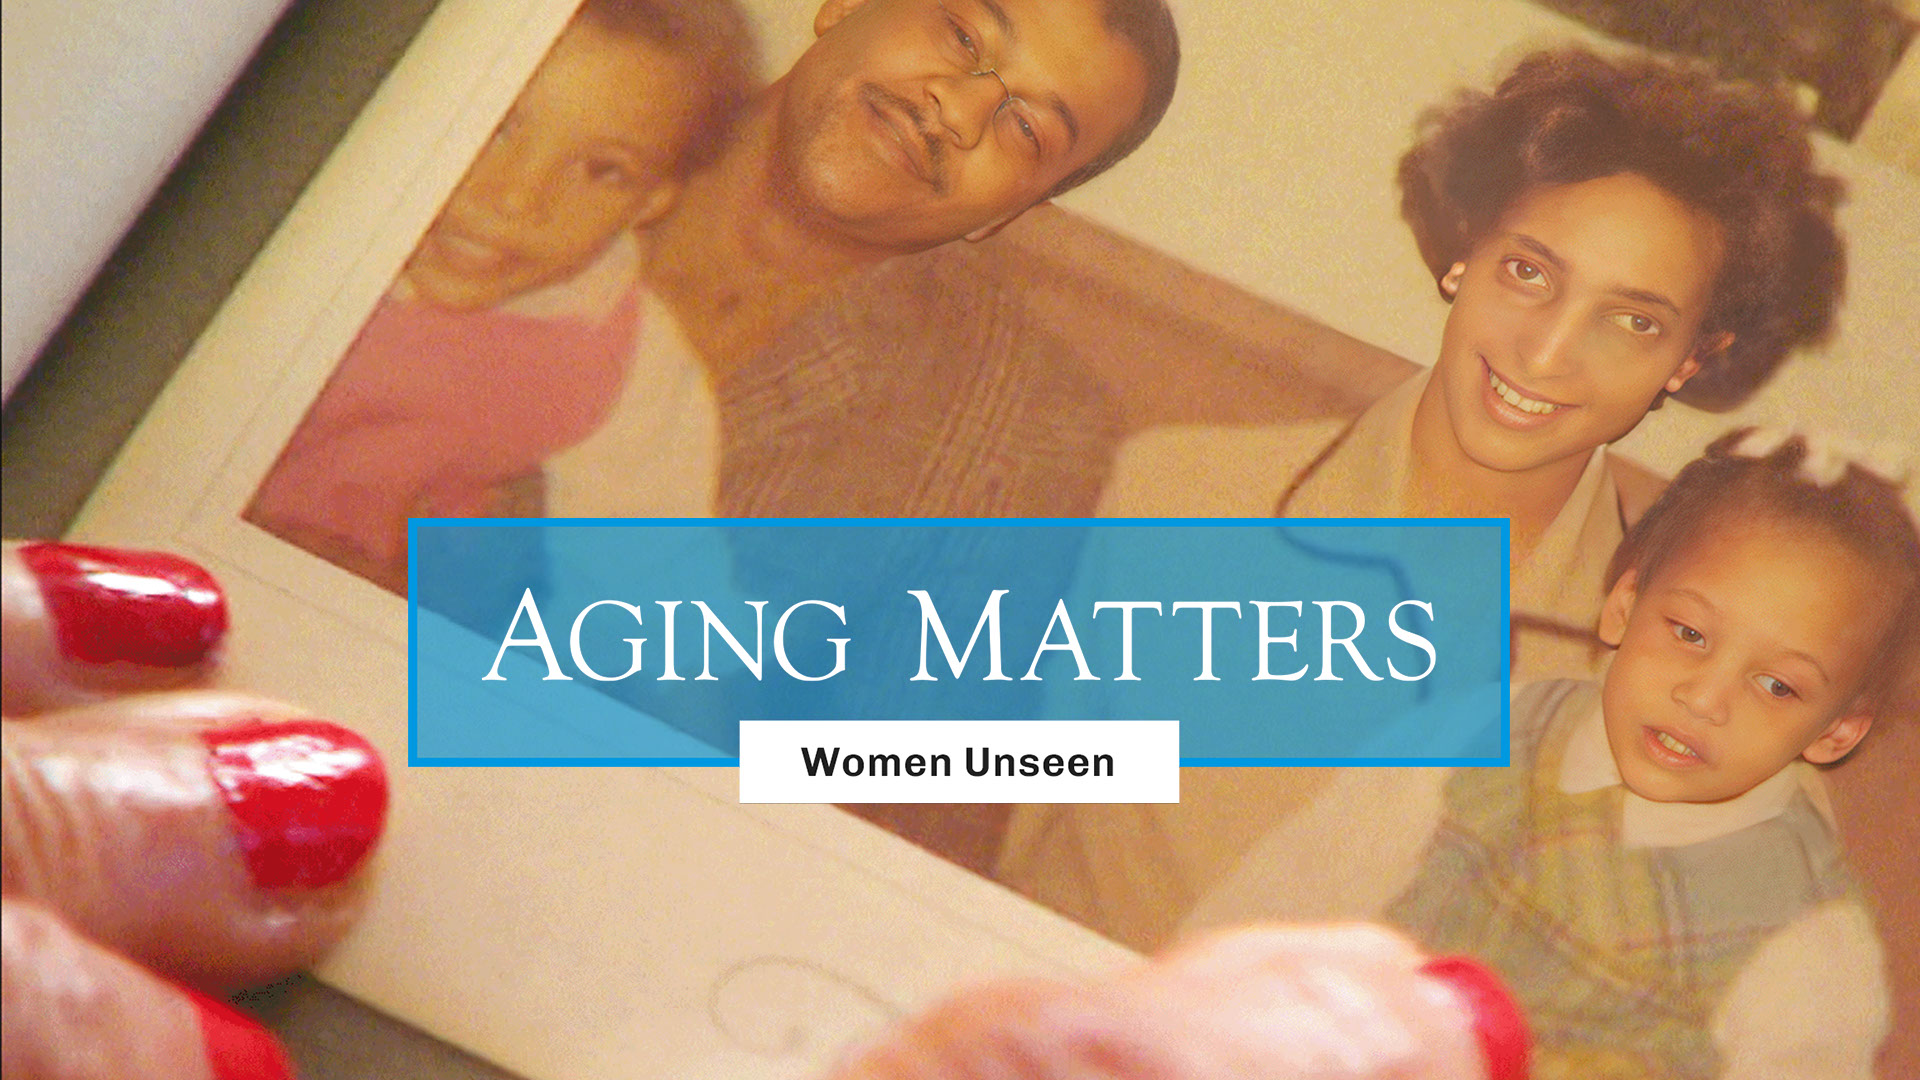 Check out Aging Matters: Women Unseen airing on a station near you!